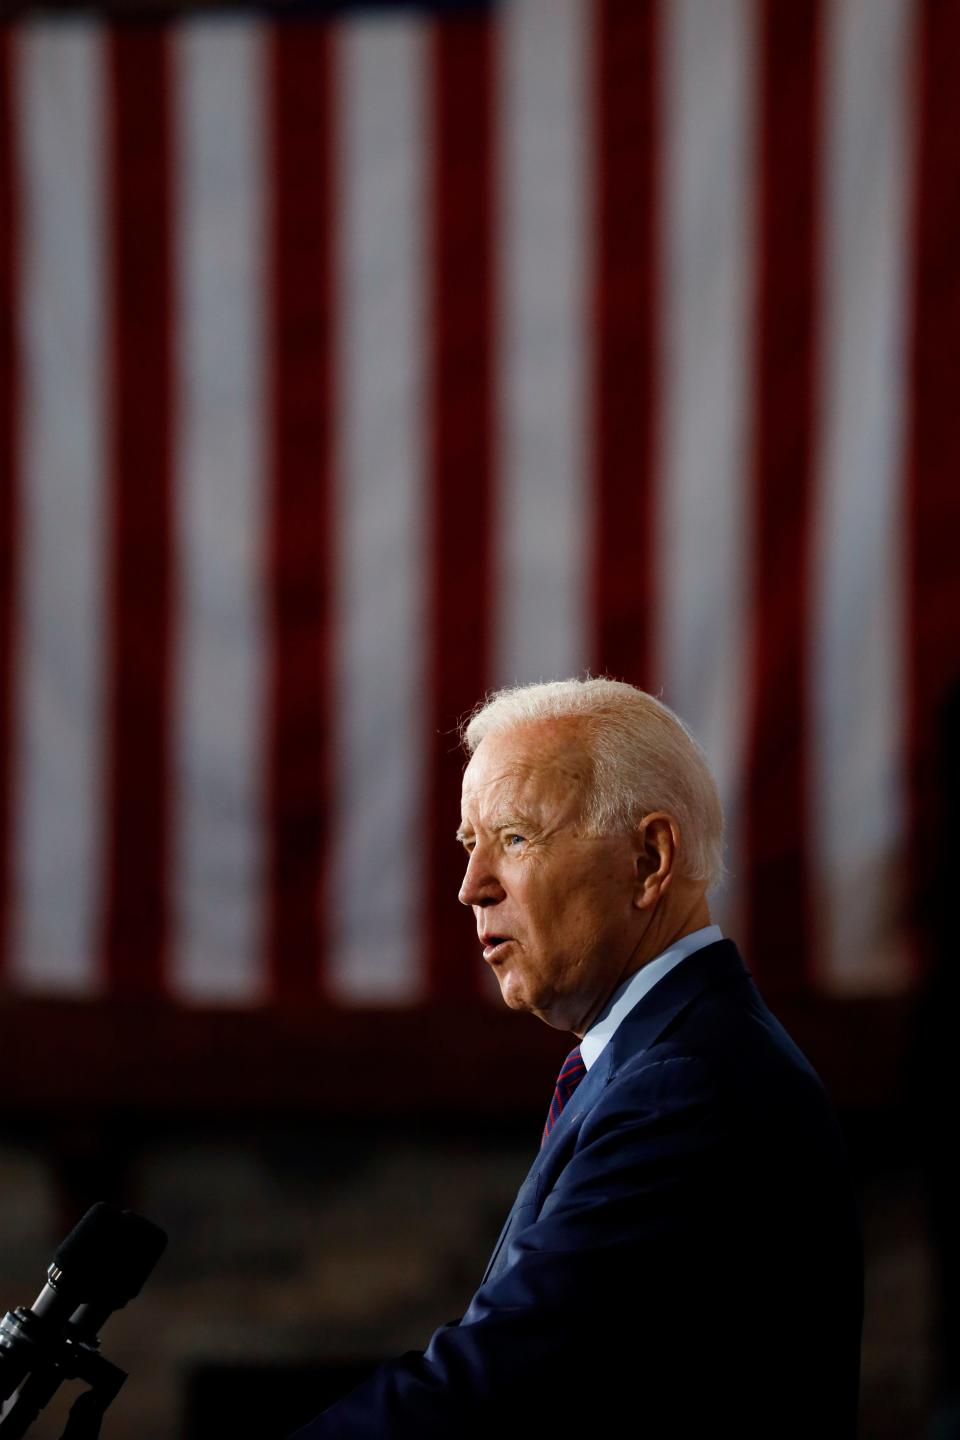 Democratic presidential candidate former Vice President Joe Biden speaks to local residents during a community event, Wednesday, Aug. 7, 2019, in Burlington, Iowa.